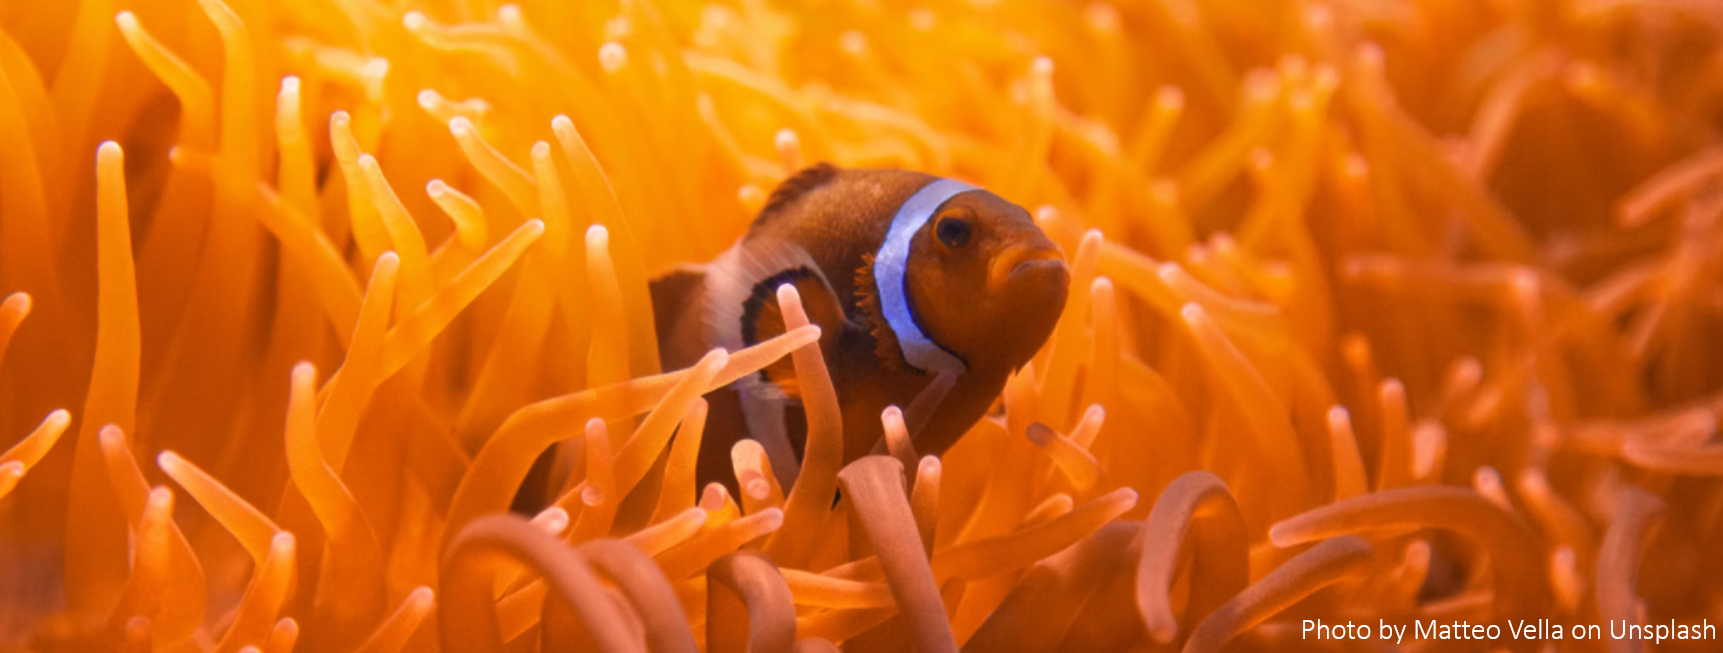 Picture of a clownfish in an orange anemone